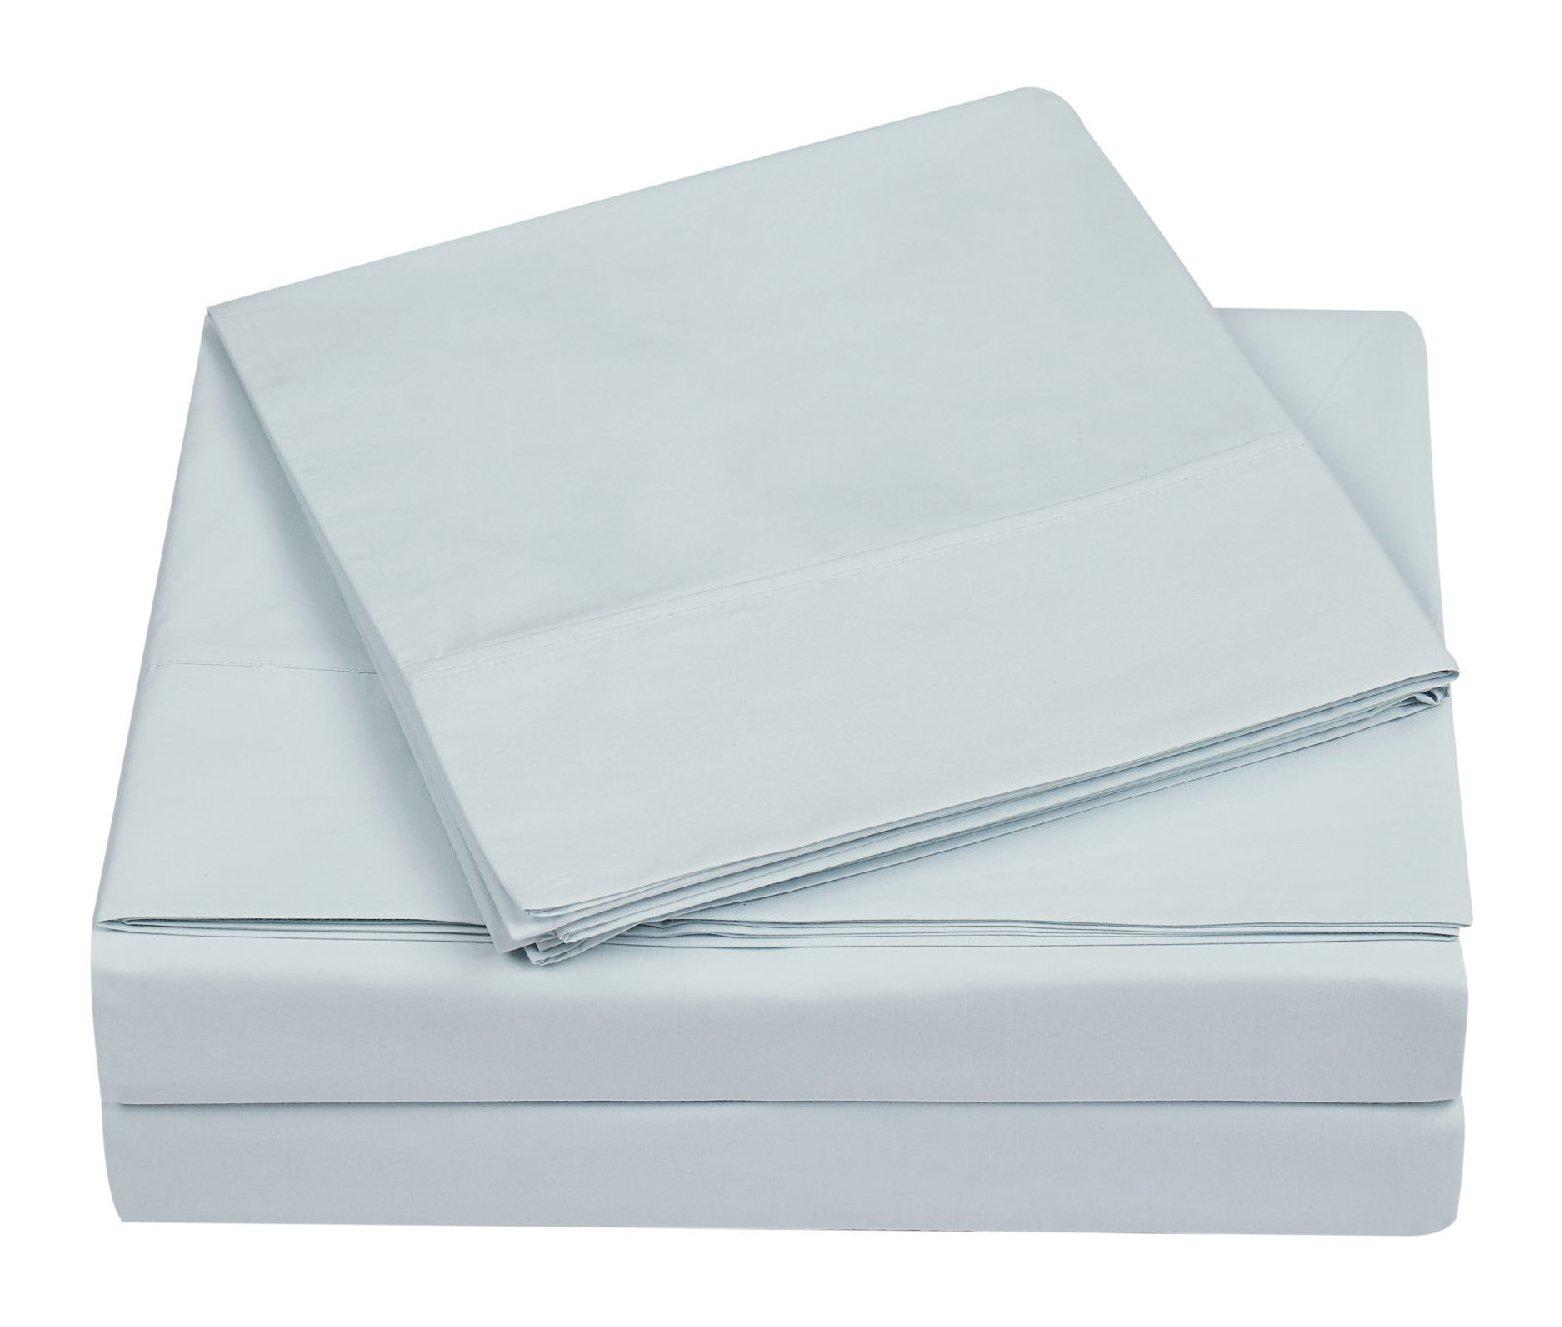 Charisma Home 400 Thread Count Percale King Pillow Case Set